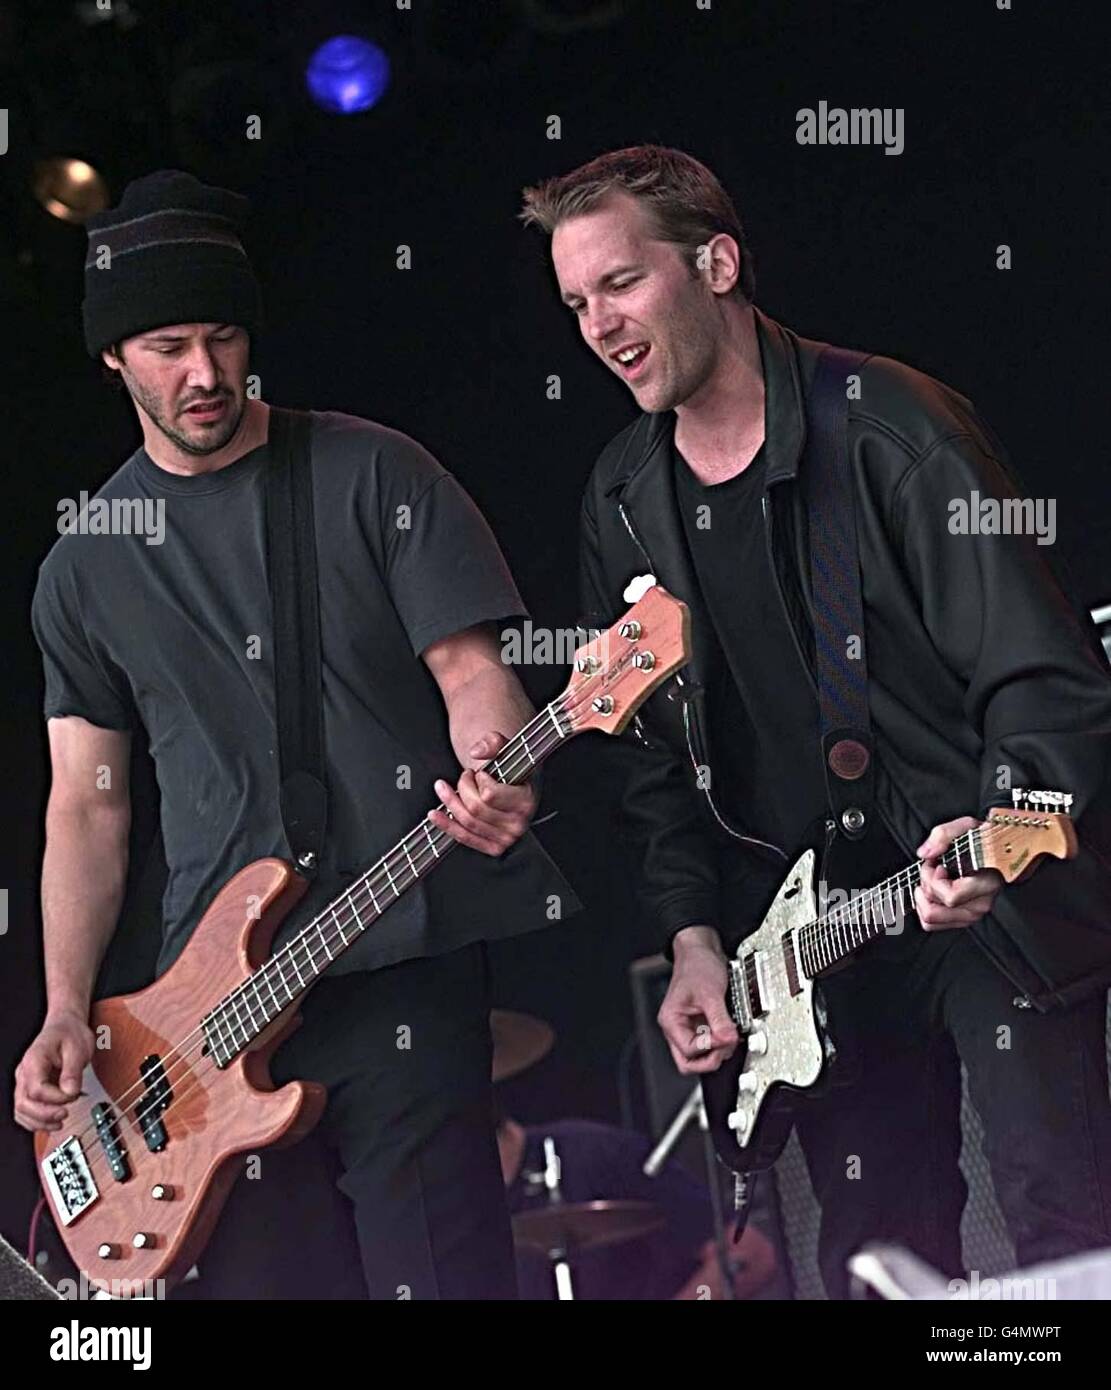 American film star Keanu Reeves (left), playing the bass guitar, on stage with his band 'Dogstar' at the Glastonbury festival. Stock Photo